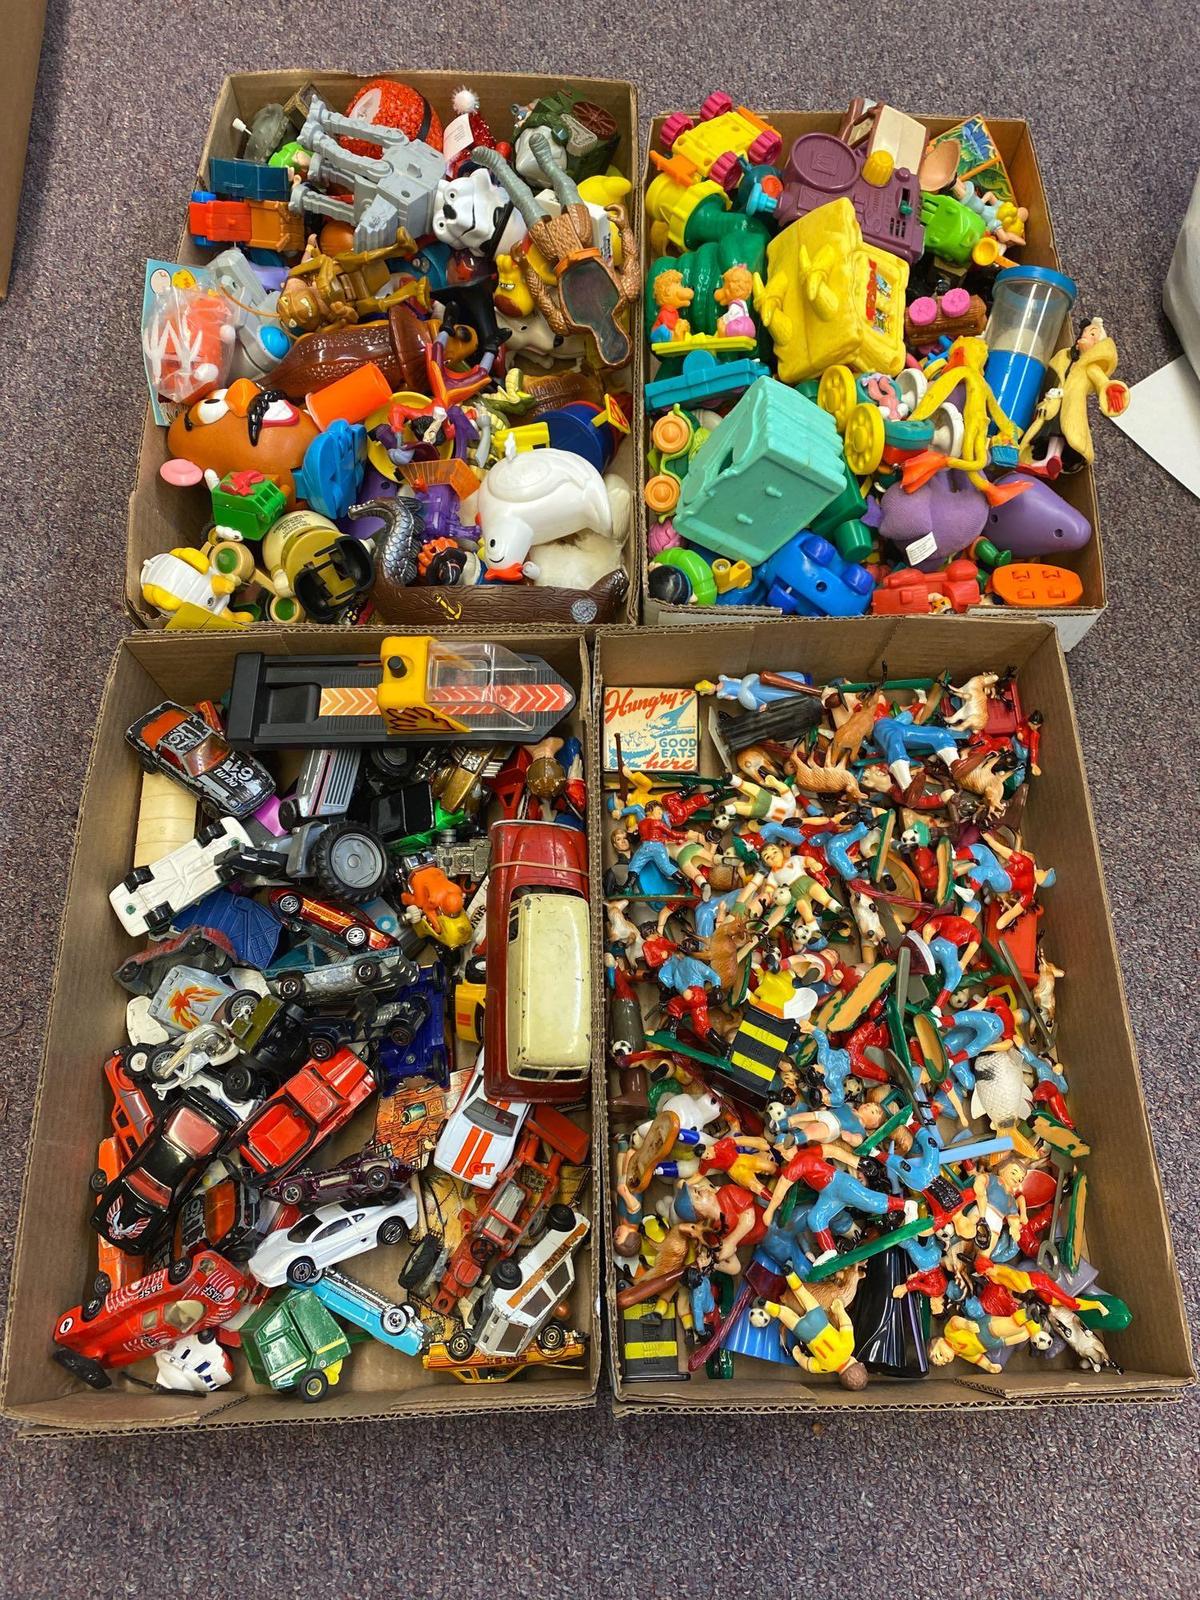 4 flats toys, Hot Wheels (few red lines), plastic vintage figurines, vintage Happy Meal toys